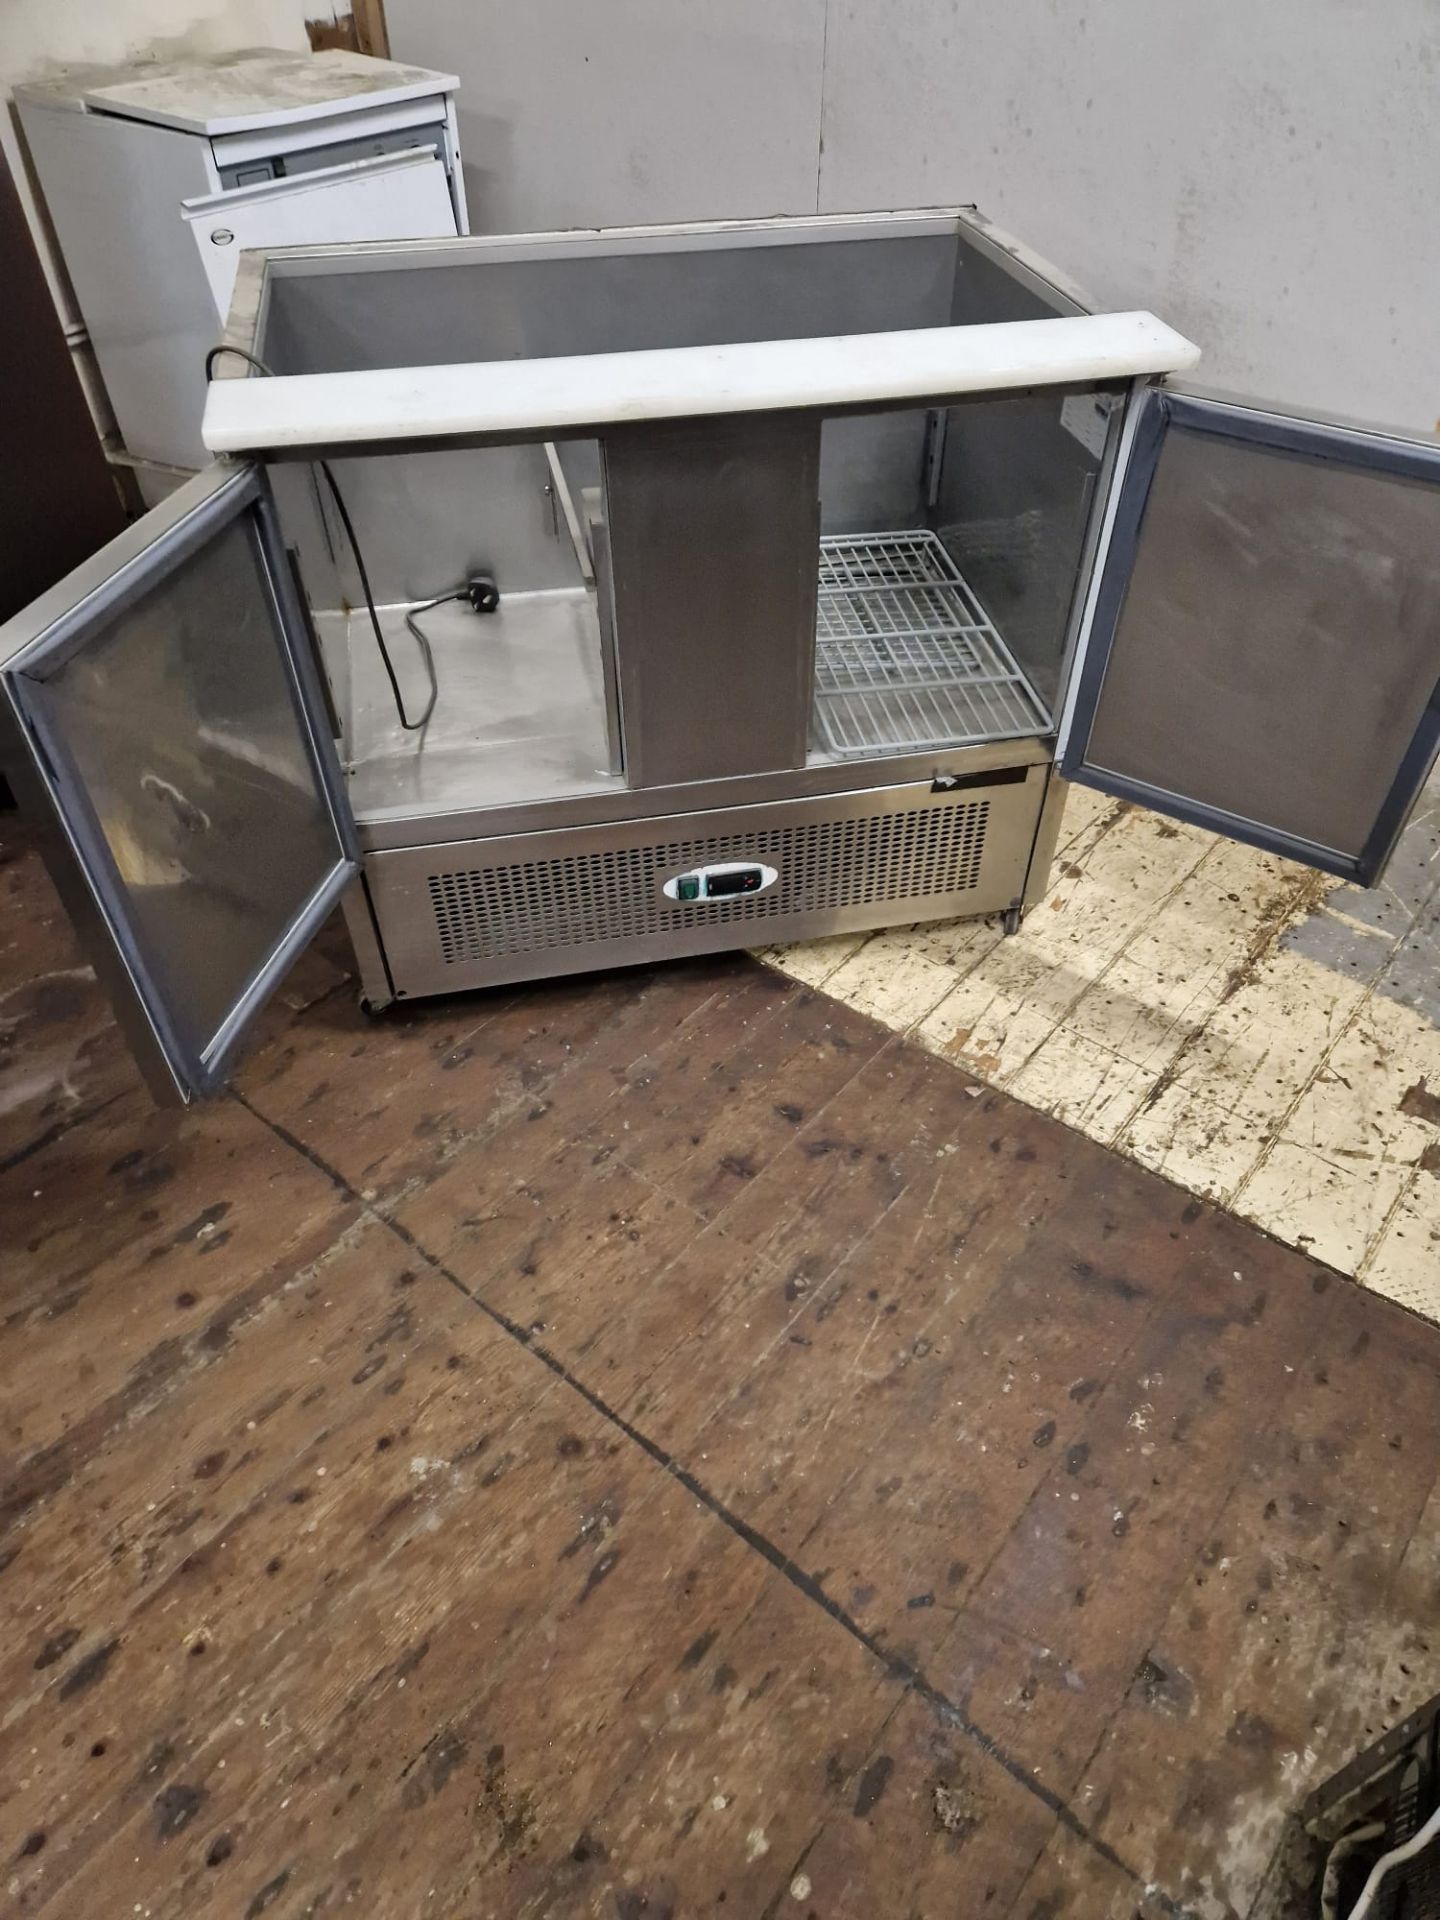 GREENFROST DOUBLE DOOR FRIDGE AND SALAD BAR ON TOP - WORKING AND SERVICED - Image 2 of 4